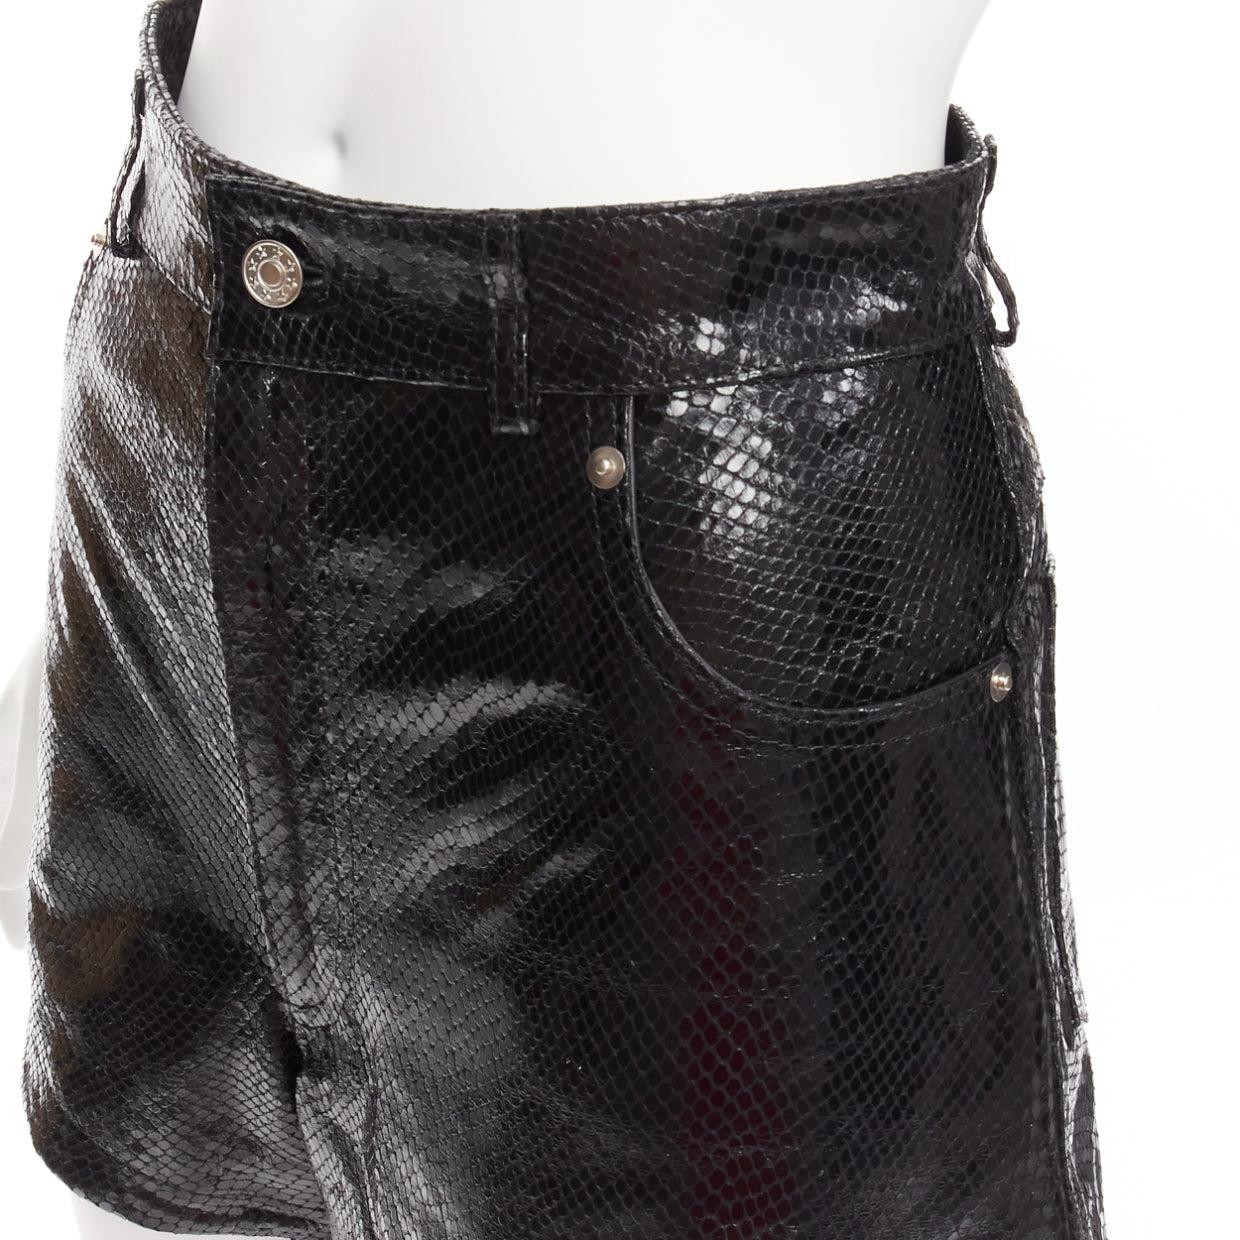 MANOKHI black genuine scaled leather high waisted shorts FR36 XS
Reference: AAWC/A00857
Brand: Manokhi
Material: Leather
Color: Black
Pattern: Animal Print
Closure: Zip Fly
Lining: Black Fabric
Made in: Romania

CONDITION:
Condition: Excellent, this